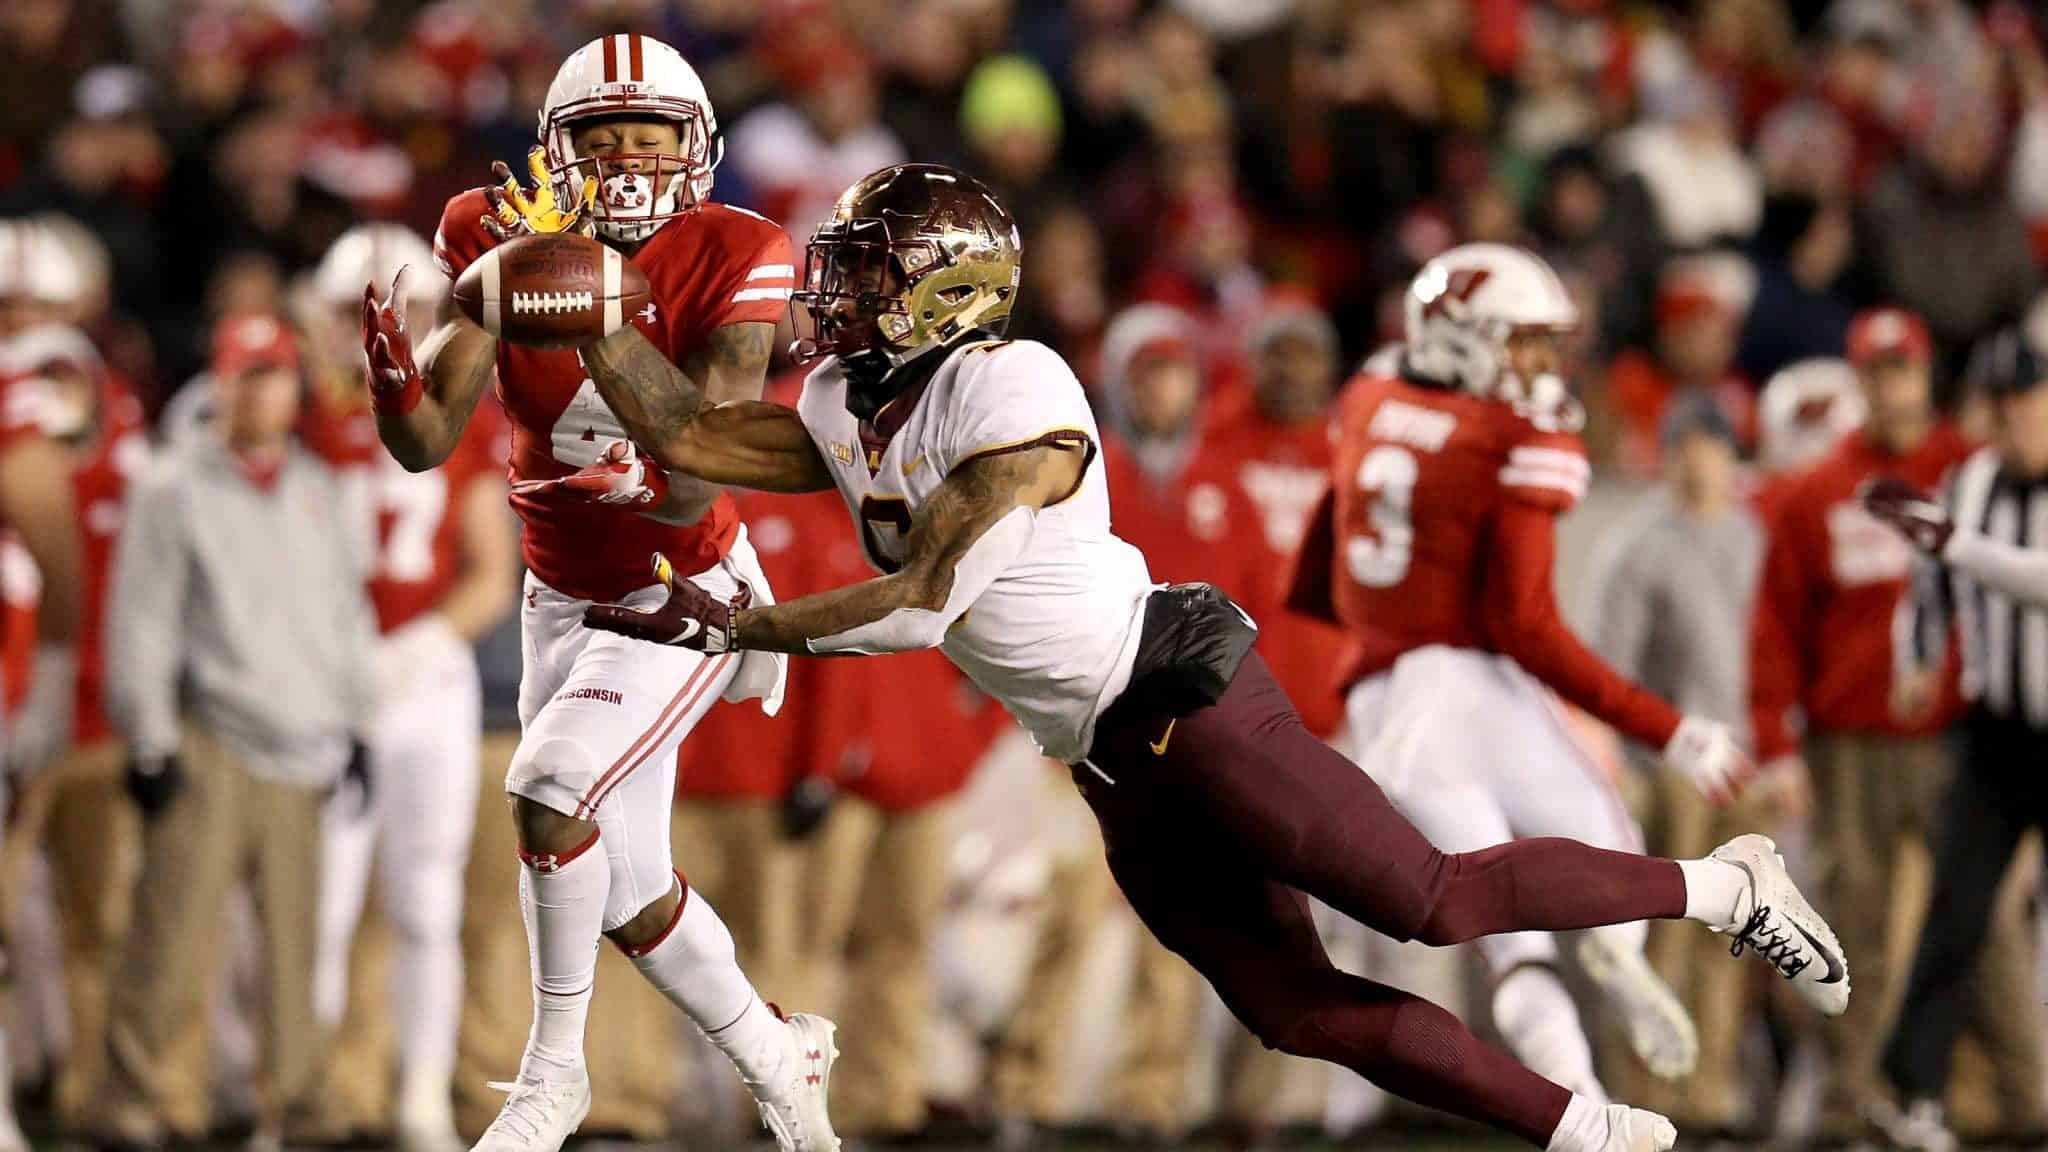 MADISON, WISCONSIN - NOVEMBER 24: Chris Williamson #6 of the Minnesota Golden Gophers intercepts a pass intended for A.J. Taylor #4 of the Wisconsin Badgers in the fourth quarter at Camp Randall Stadium on November 24, 2018 in Madison, Wisconsin.